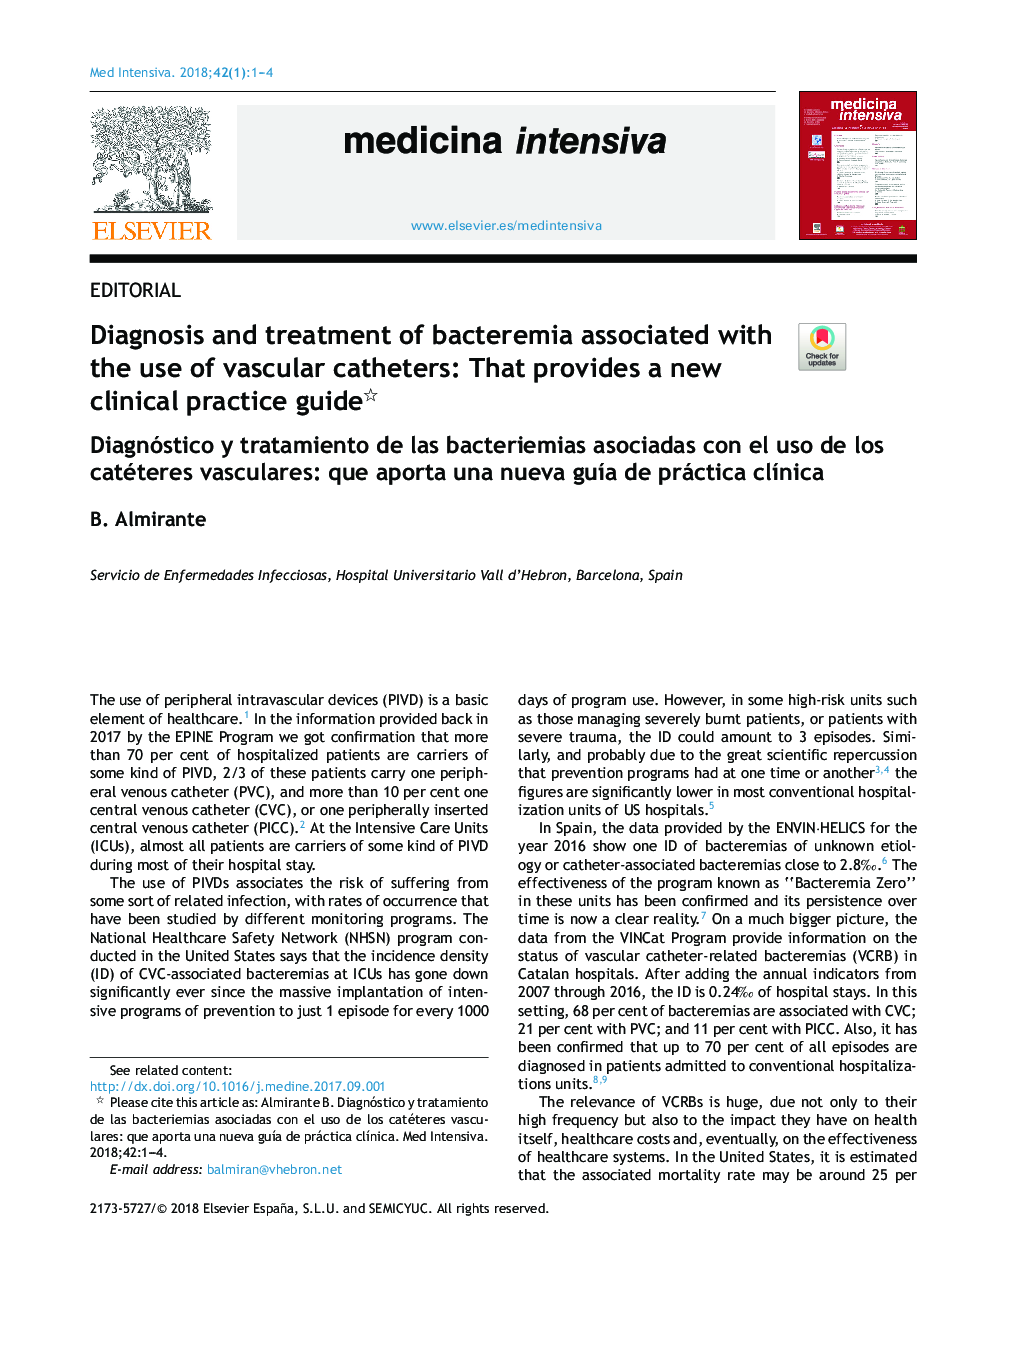 Diagnosis and treatment of bacteremia associated with the use of vascular catheters: That provides a new clinical practice guide